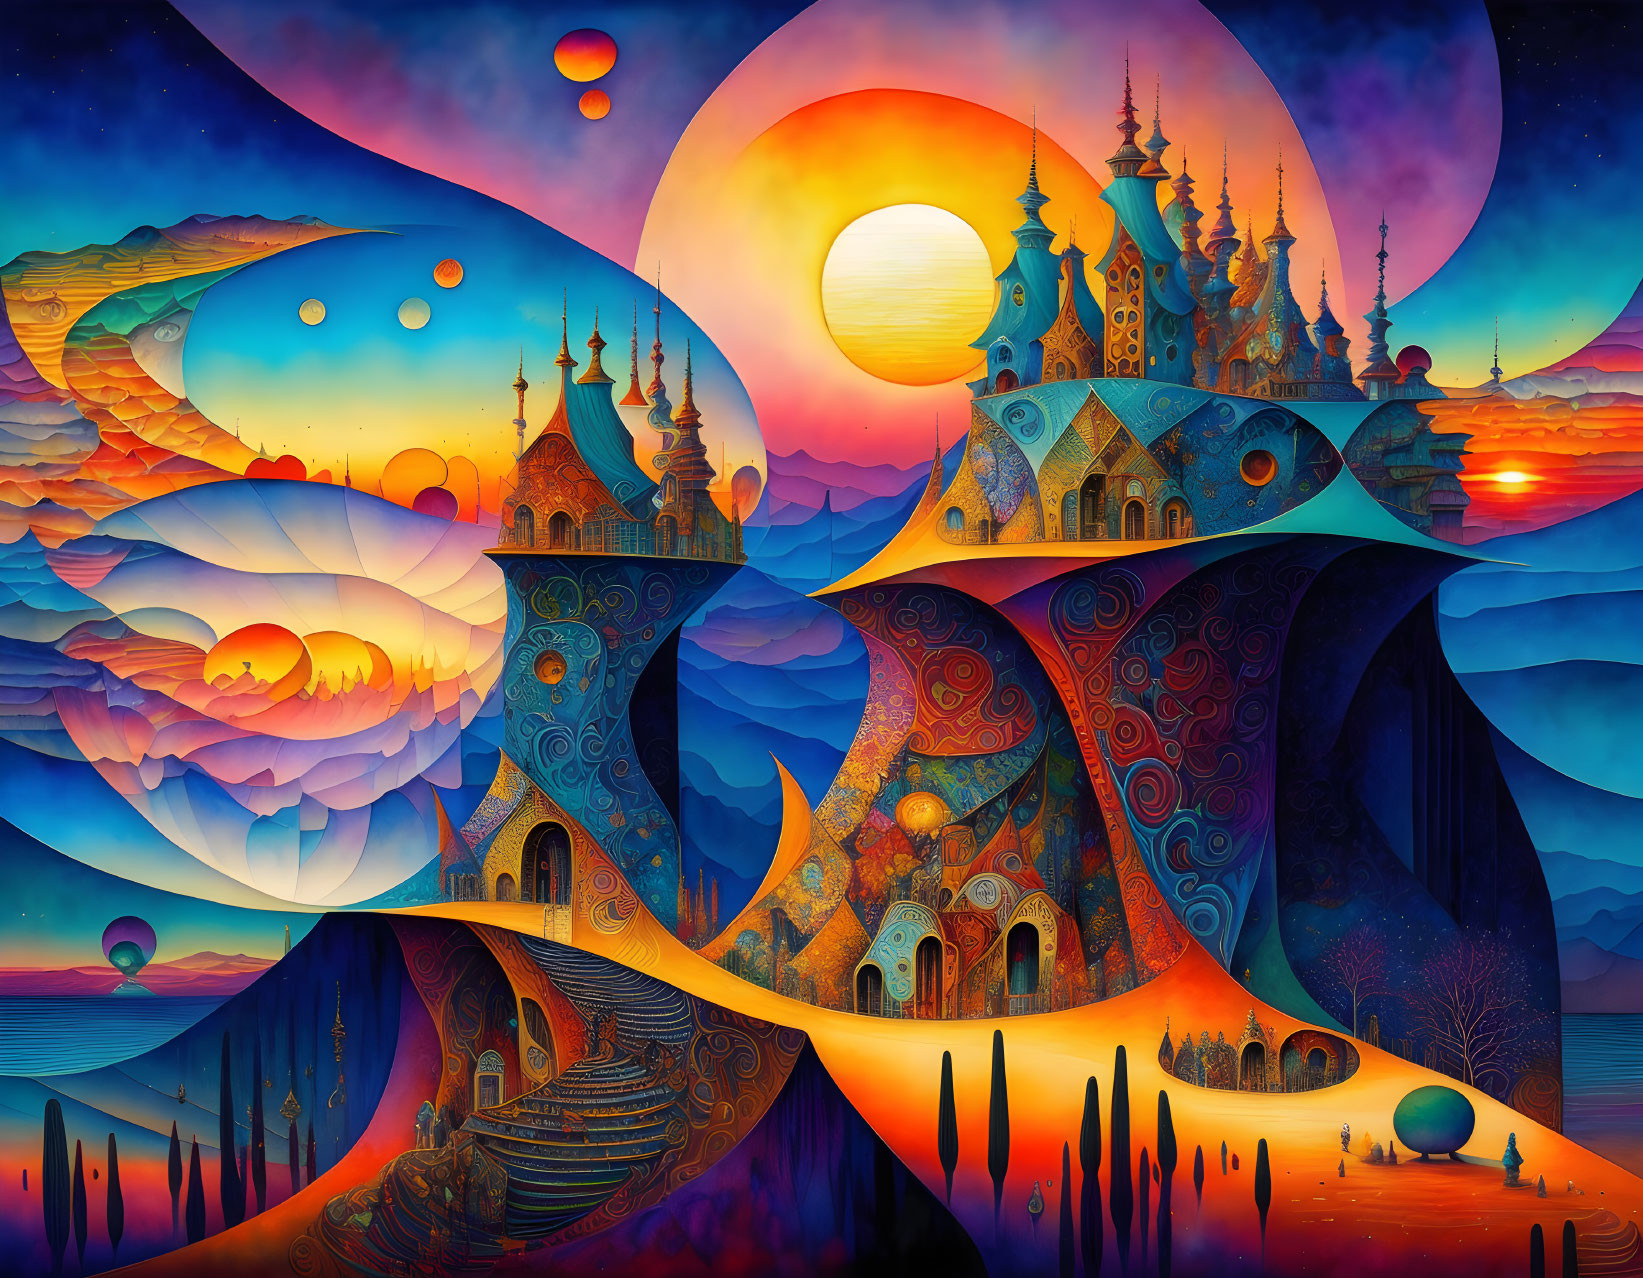 Colorful Whimsical Landscape with Celestial Bodies at Sunset